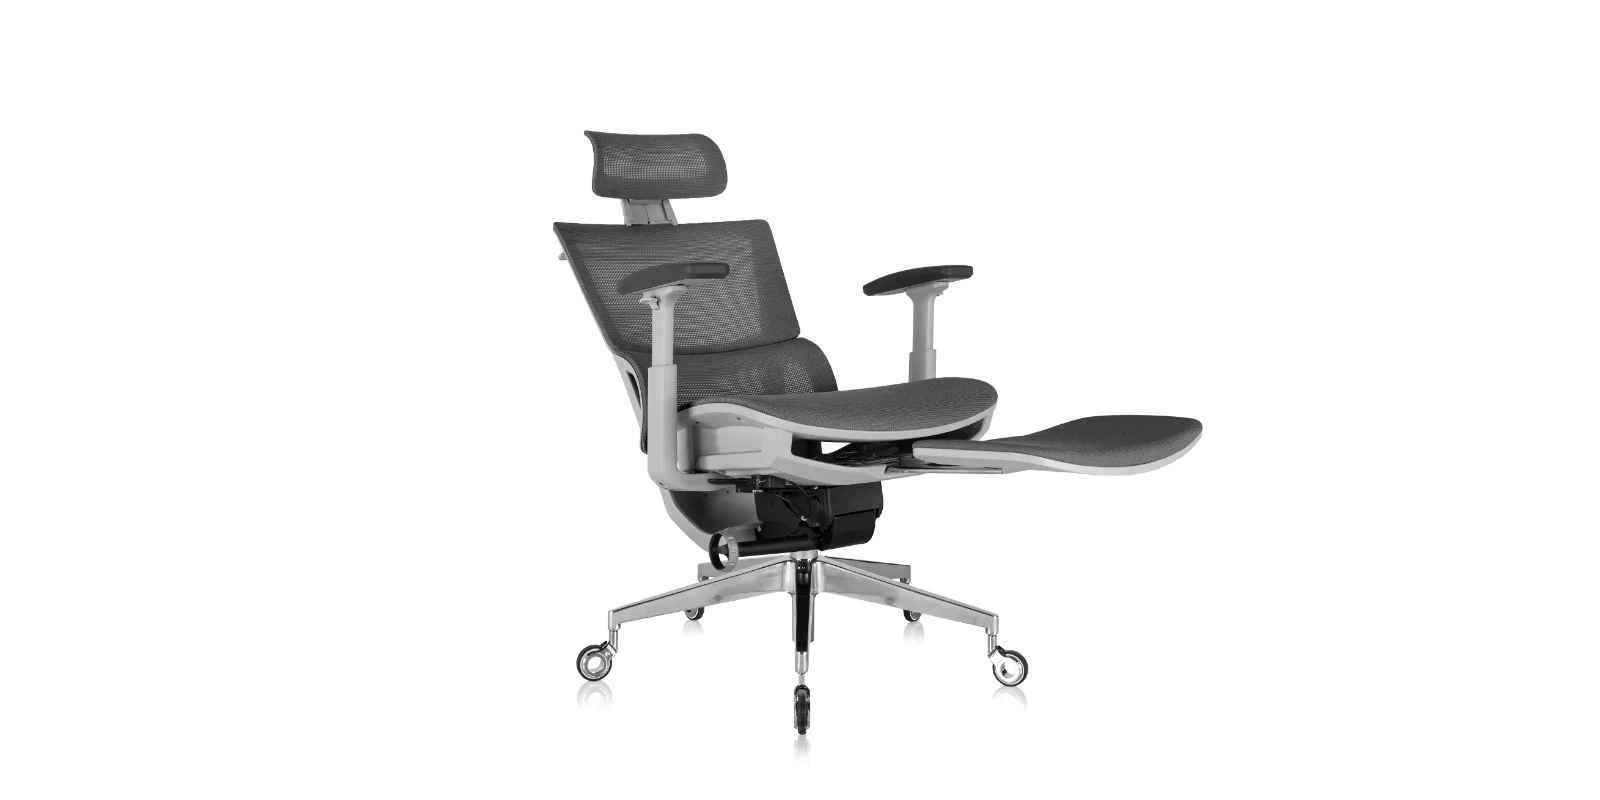 Do ergonomic office chairs need to be replaced?